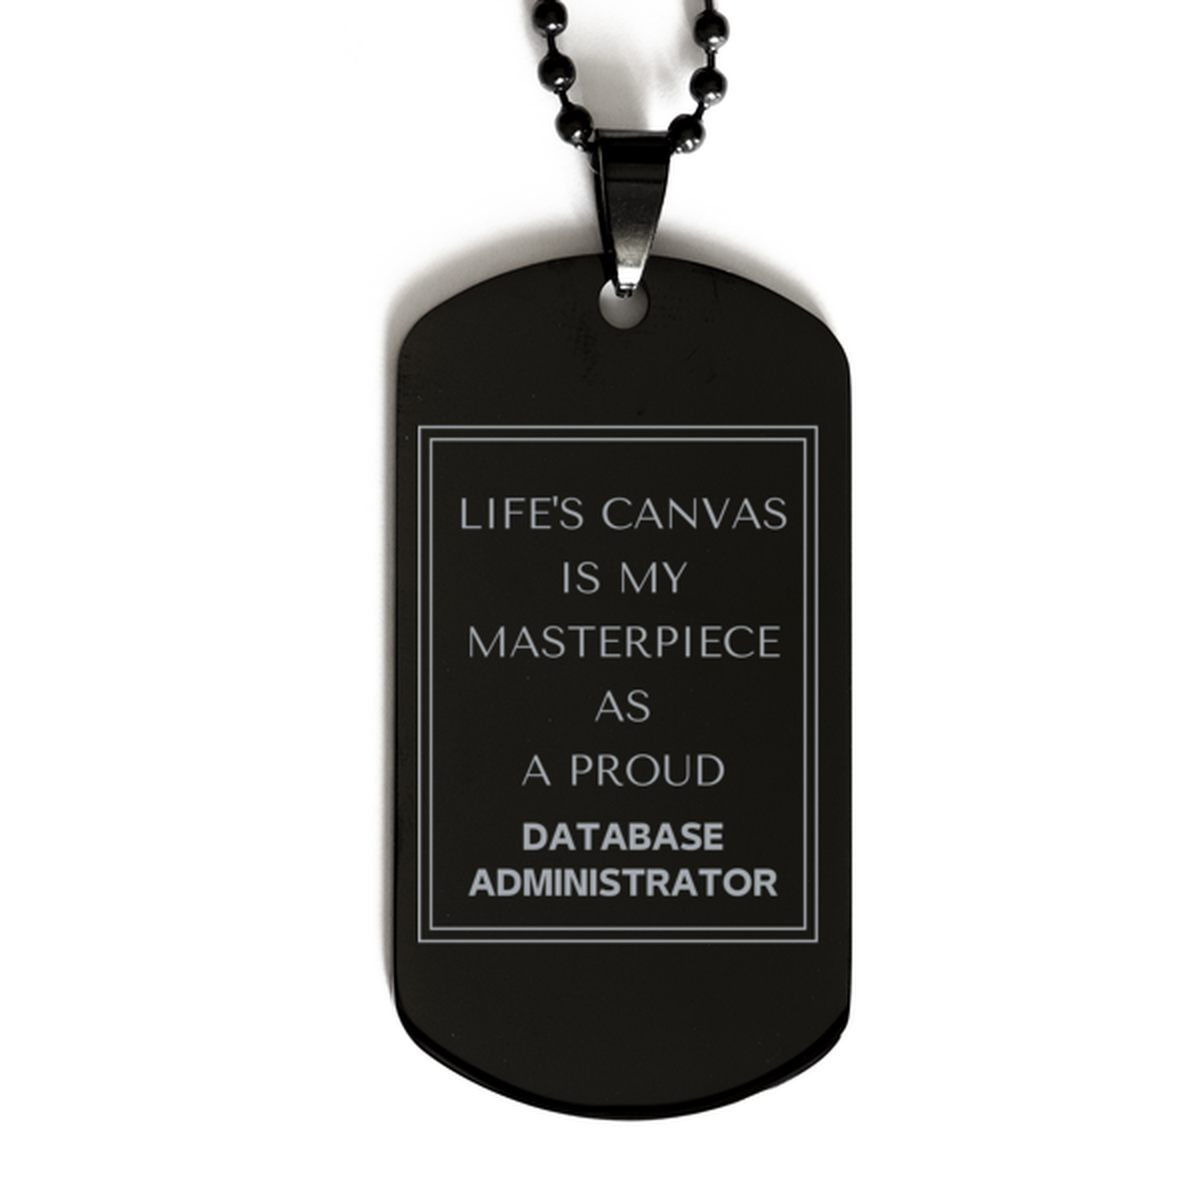 Proud Database Administrator Gifts, Life's canvas is my masterpiece, Epic Birthday Christmas Unique Black Dog Tag For Database Administrator, Coworkers, Men, Women, Friends